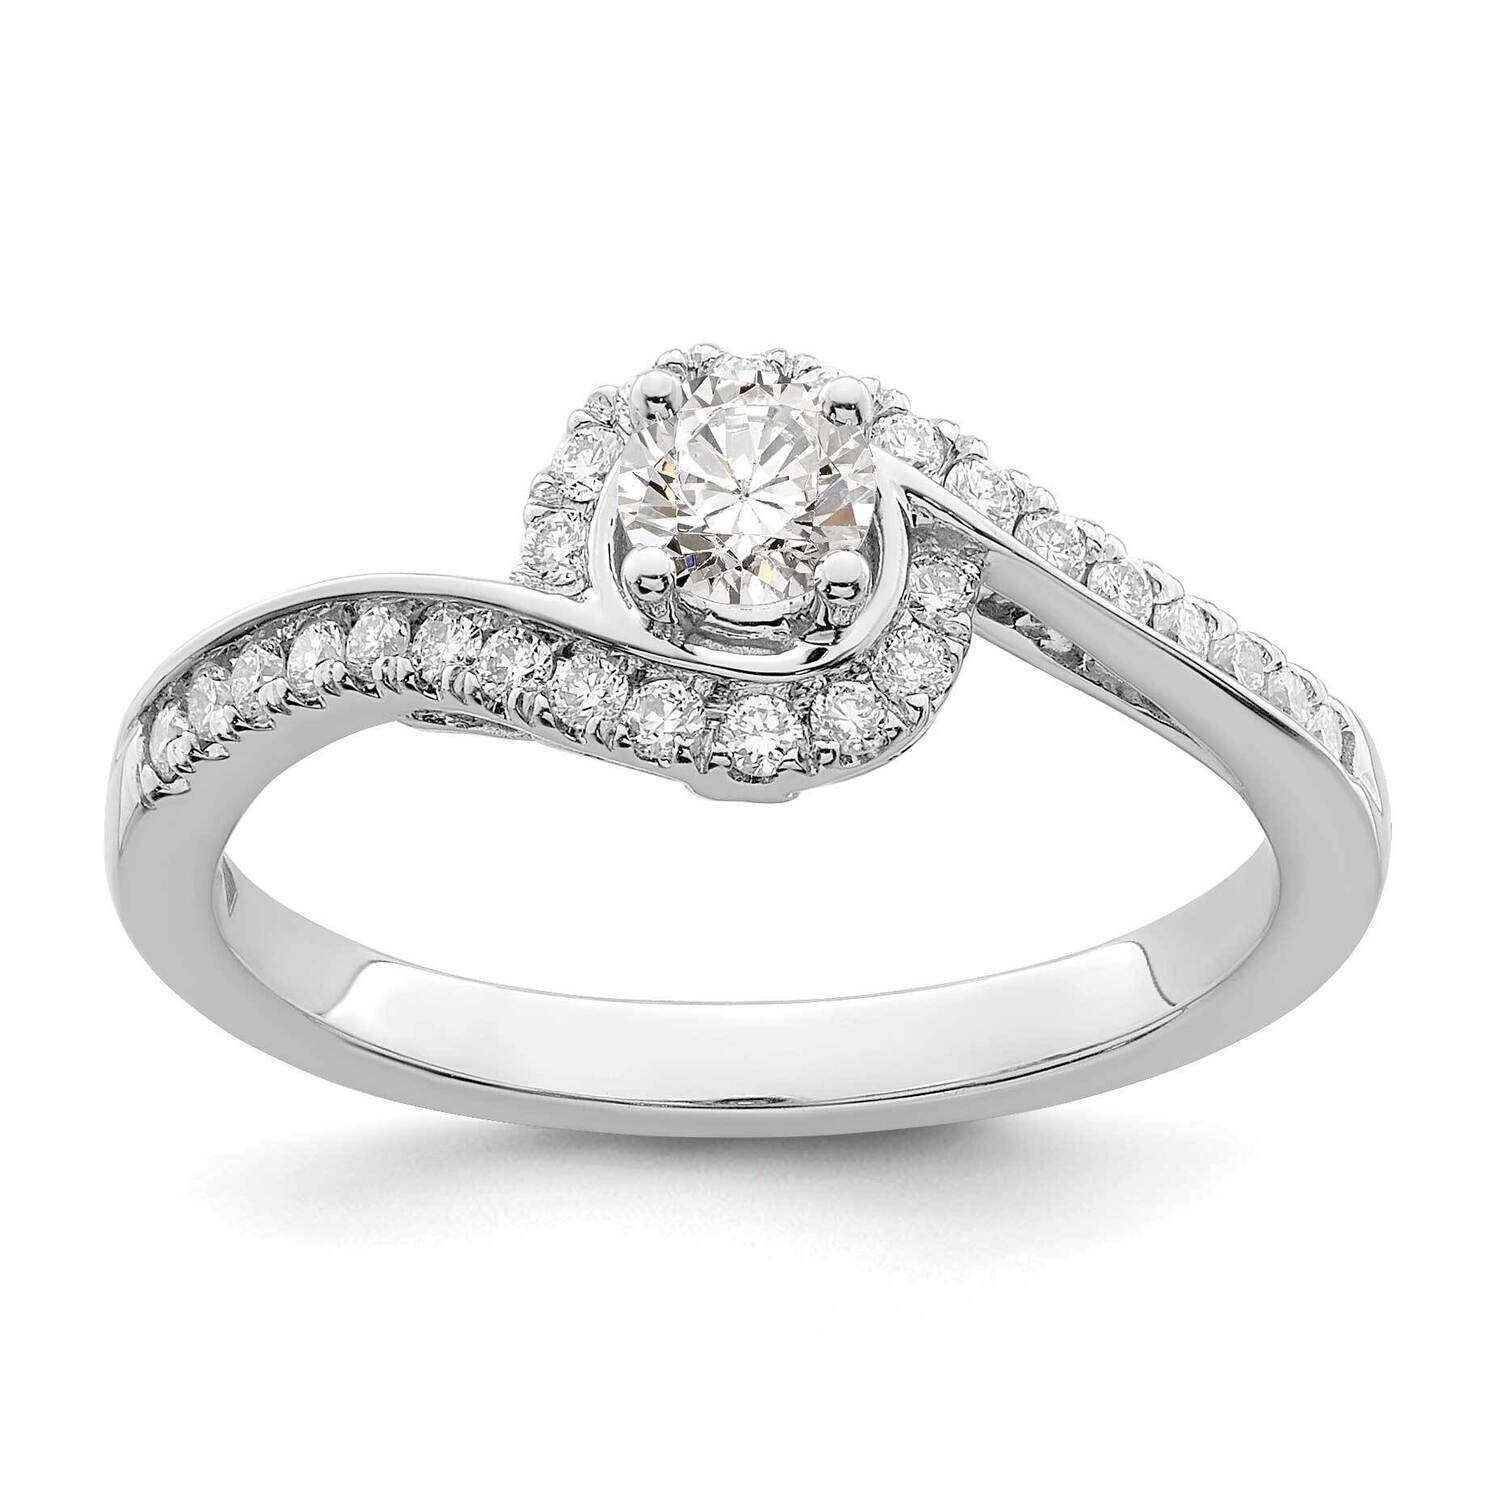 By-Pass Holds 1/4 Carat 4.00mm Round Center 1/4 Carat Diamond Semi-Mount Engagement Ring 14k White Gold RM2406E-025-WAA